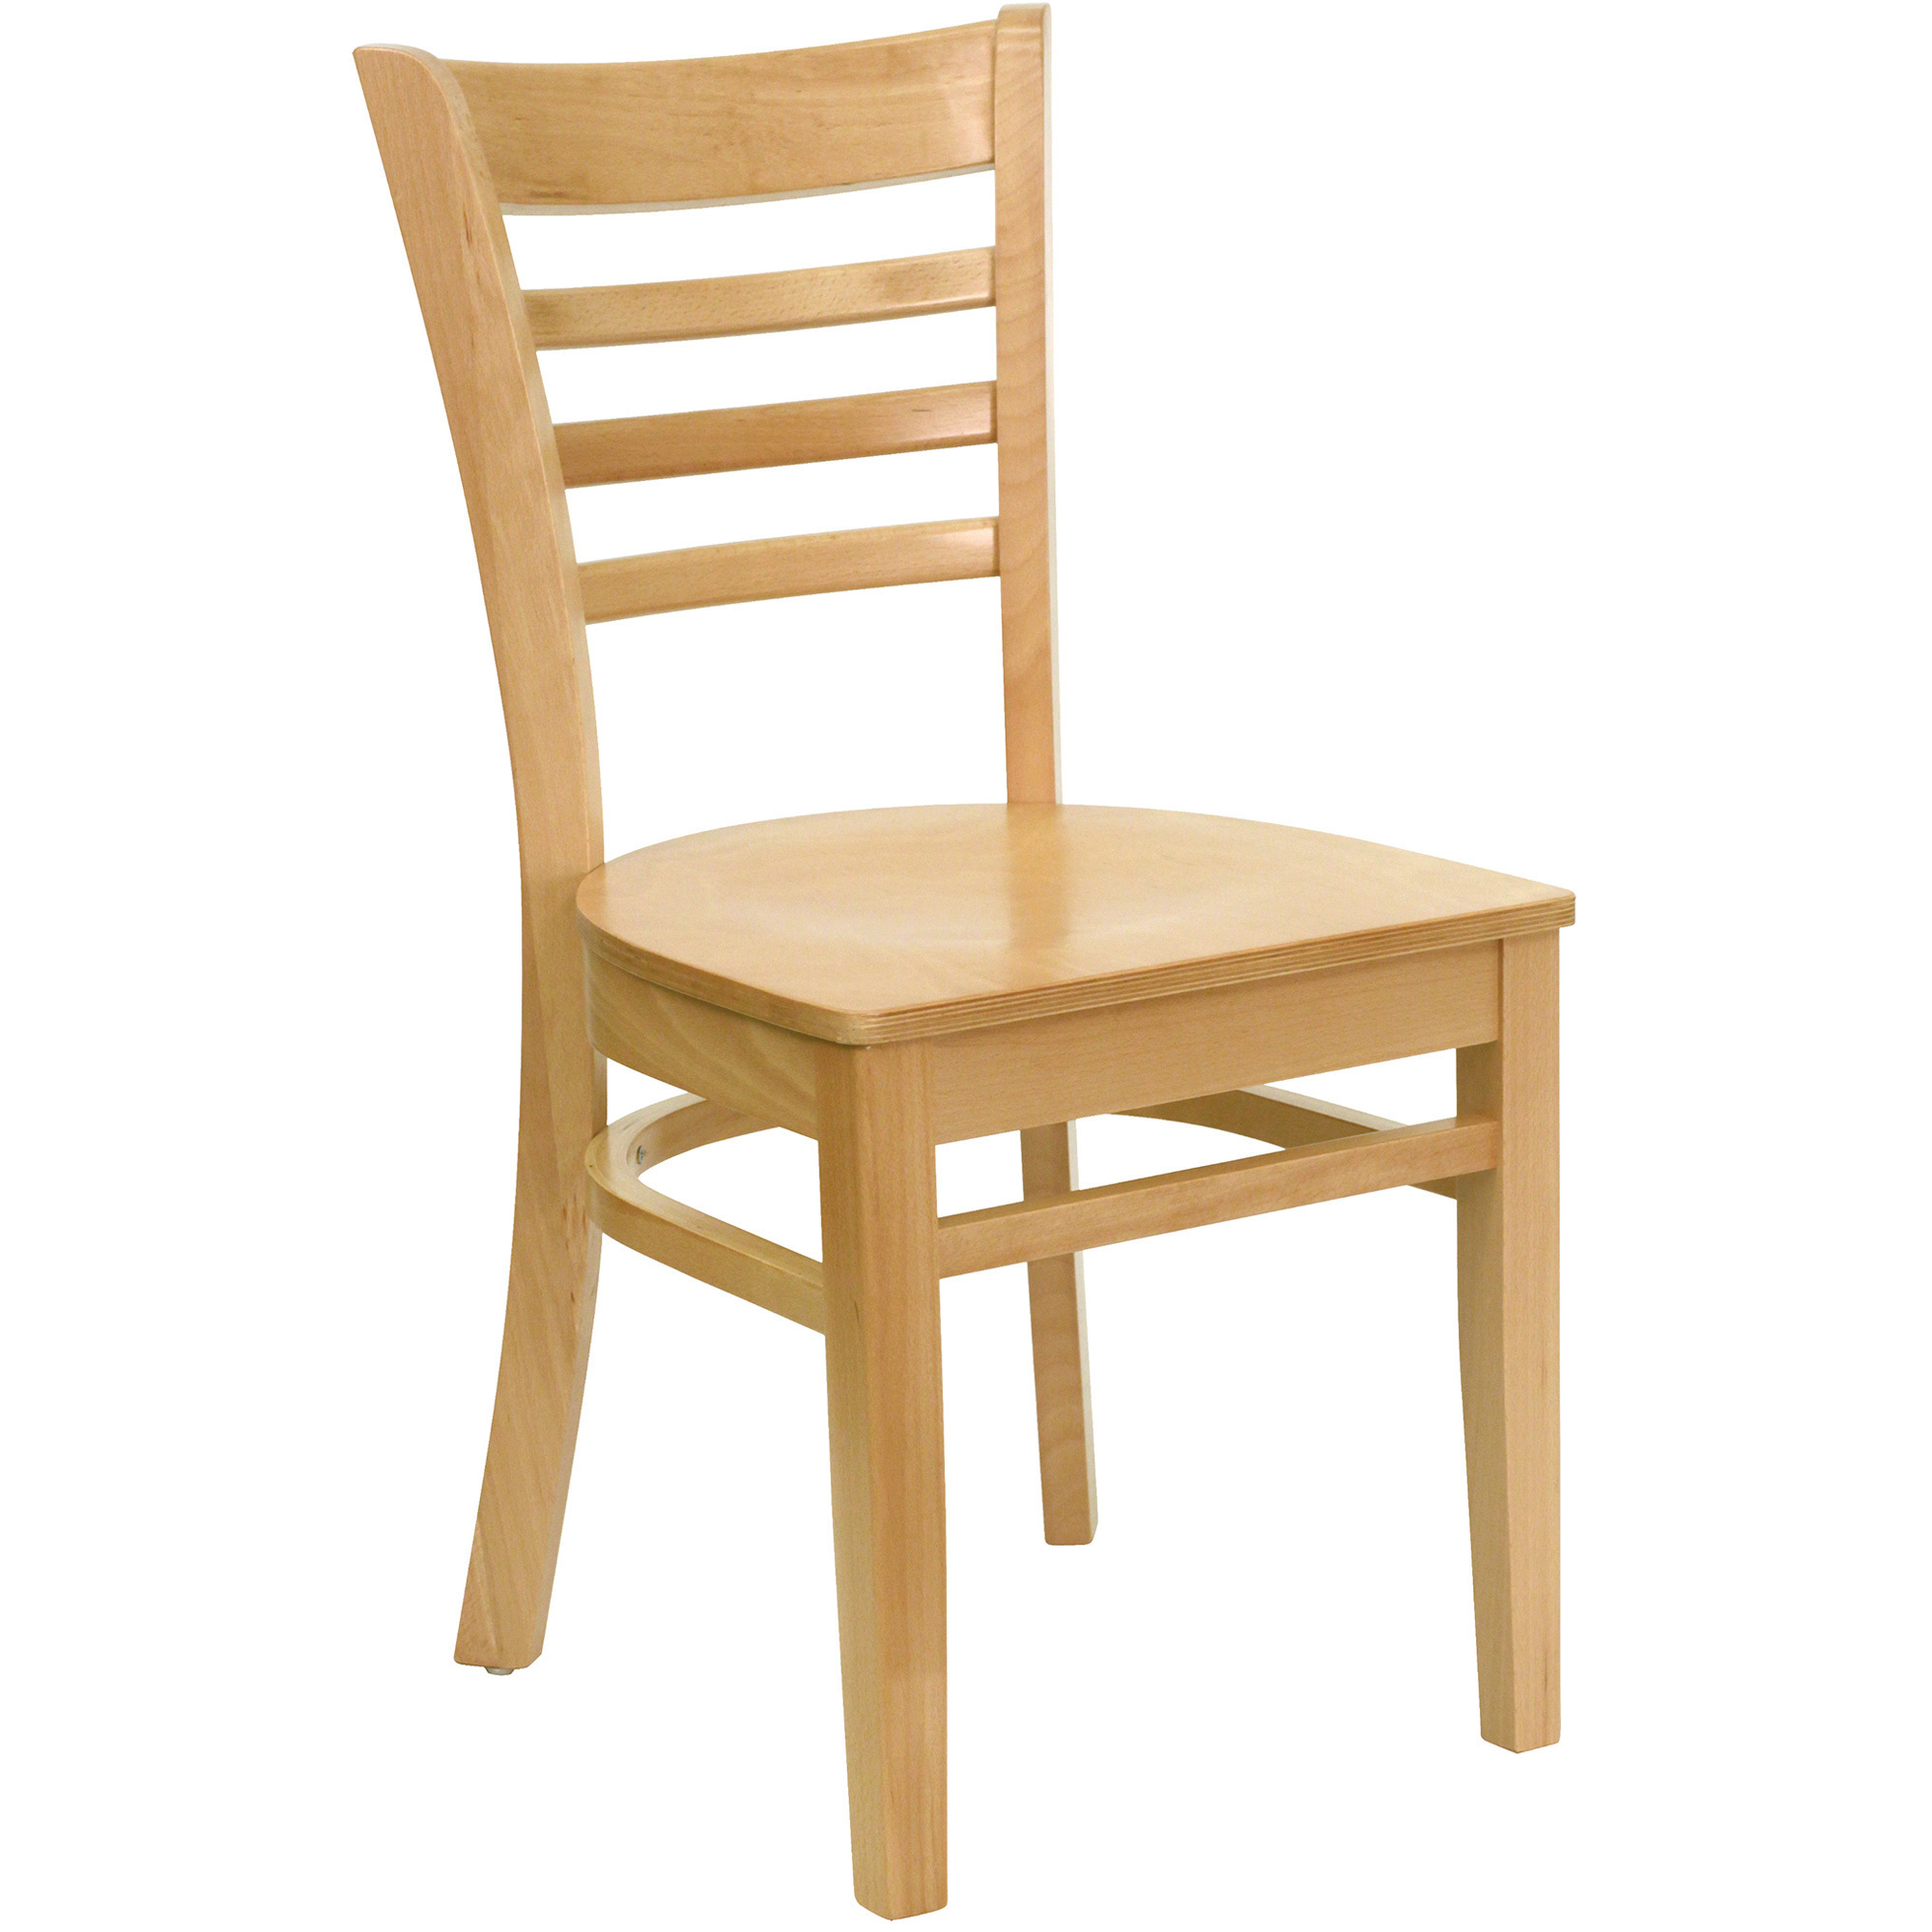 Wood Dining Chair — Natural Finish, 800-Lb. Capacity, 17 1/4Inch W x 20Inch D x 33 3/4Inch H, Model - Flash Furniture XUDGW0005LADNAT